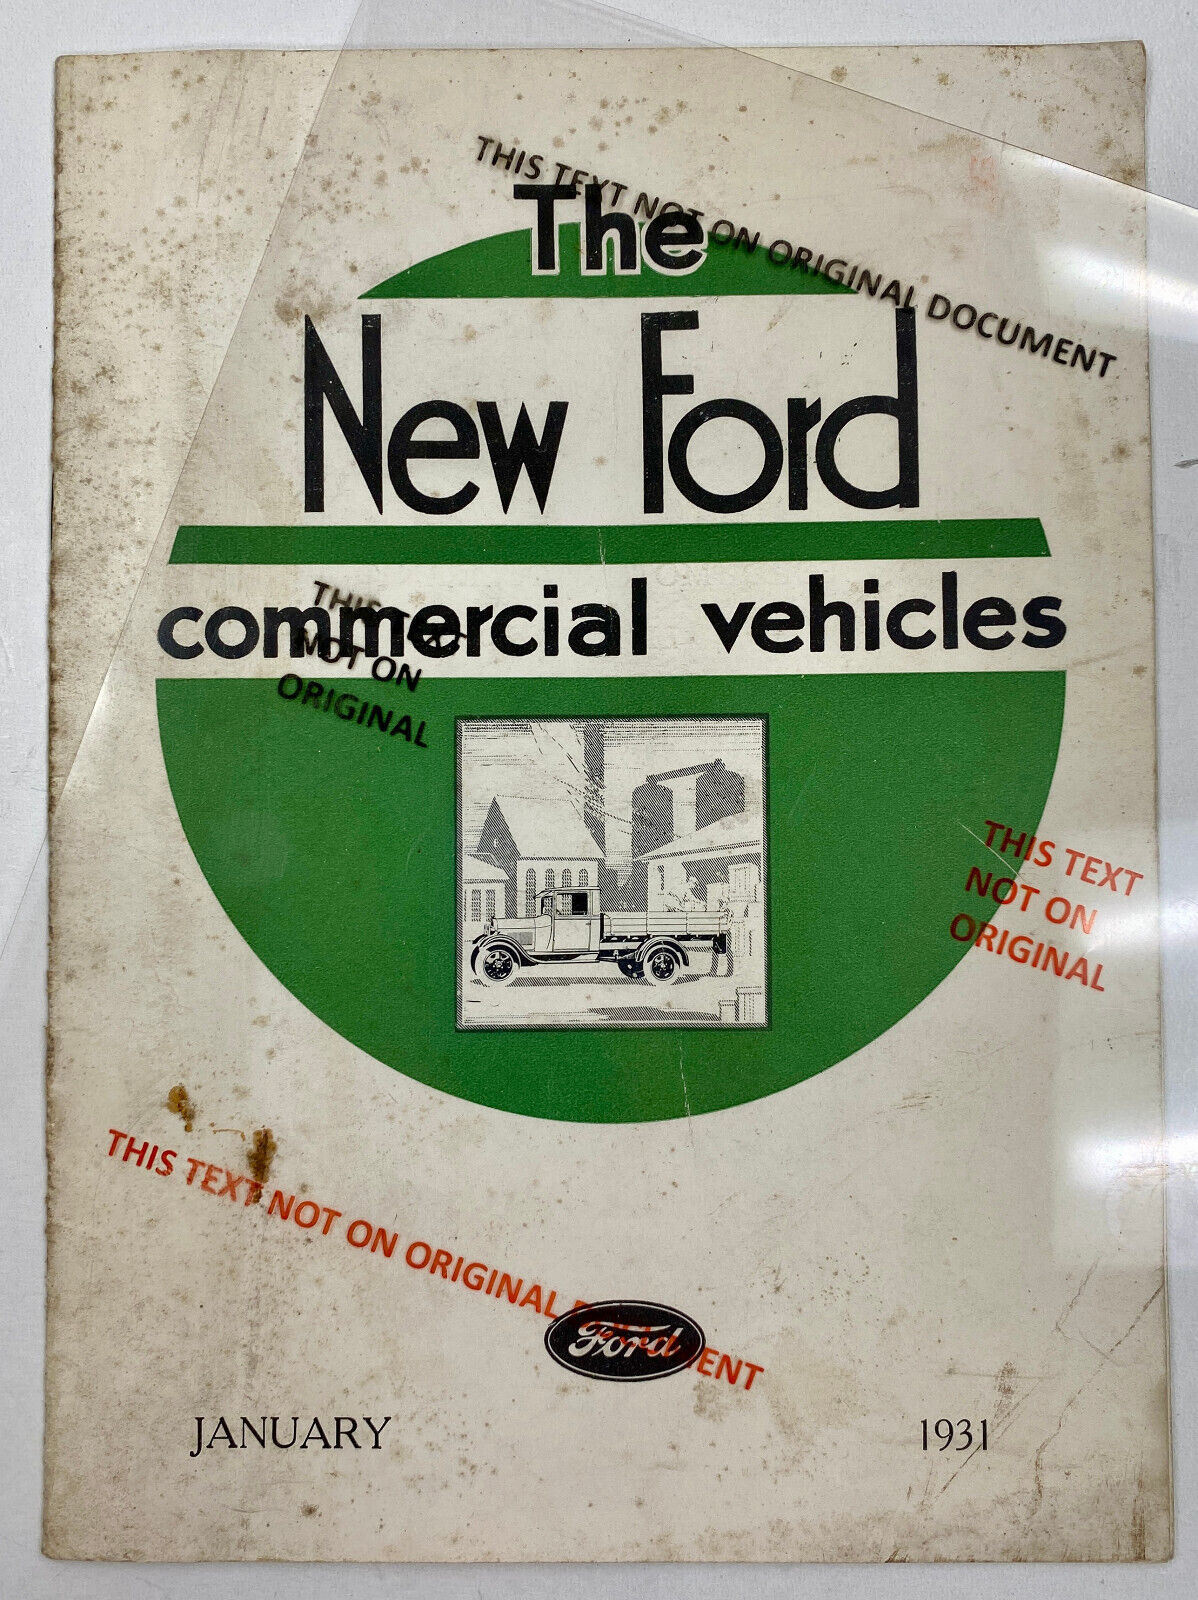 Original 1931 The New Ford Commercial Vehicles Brochure-London & Manchester